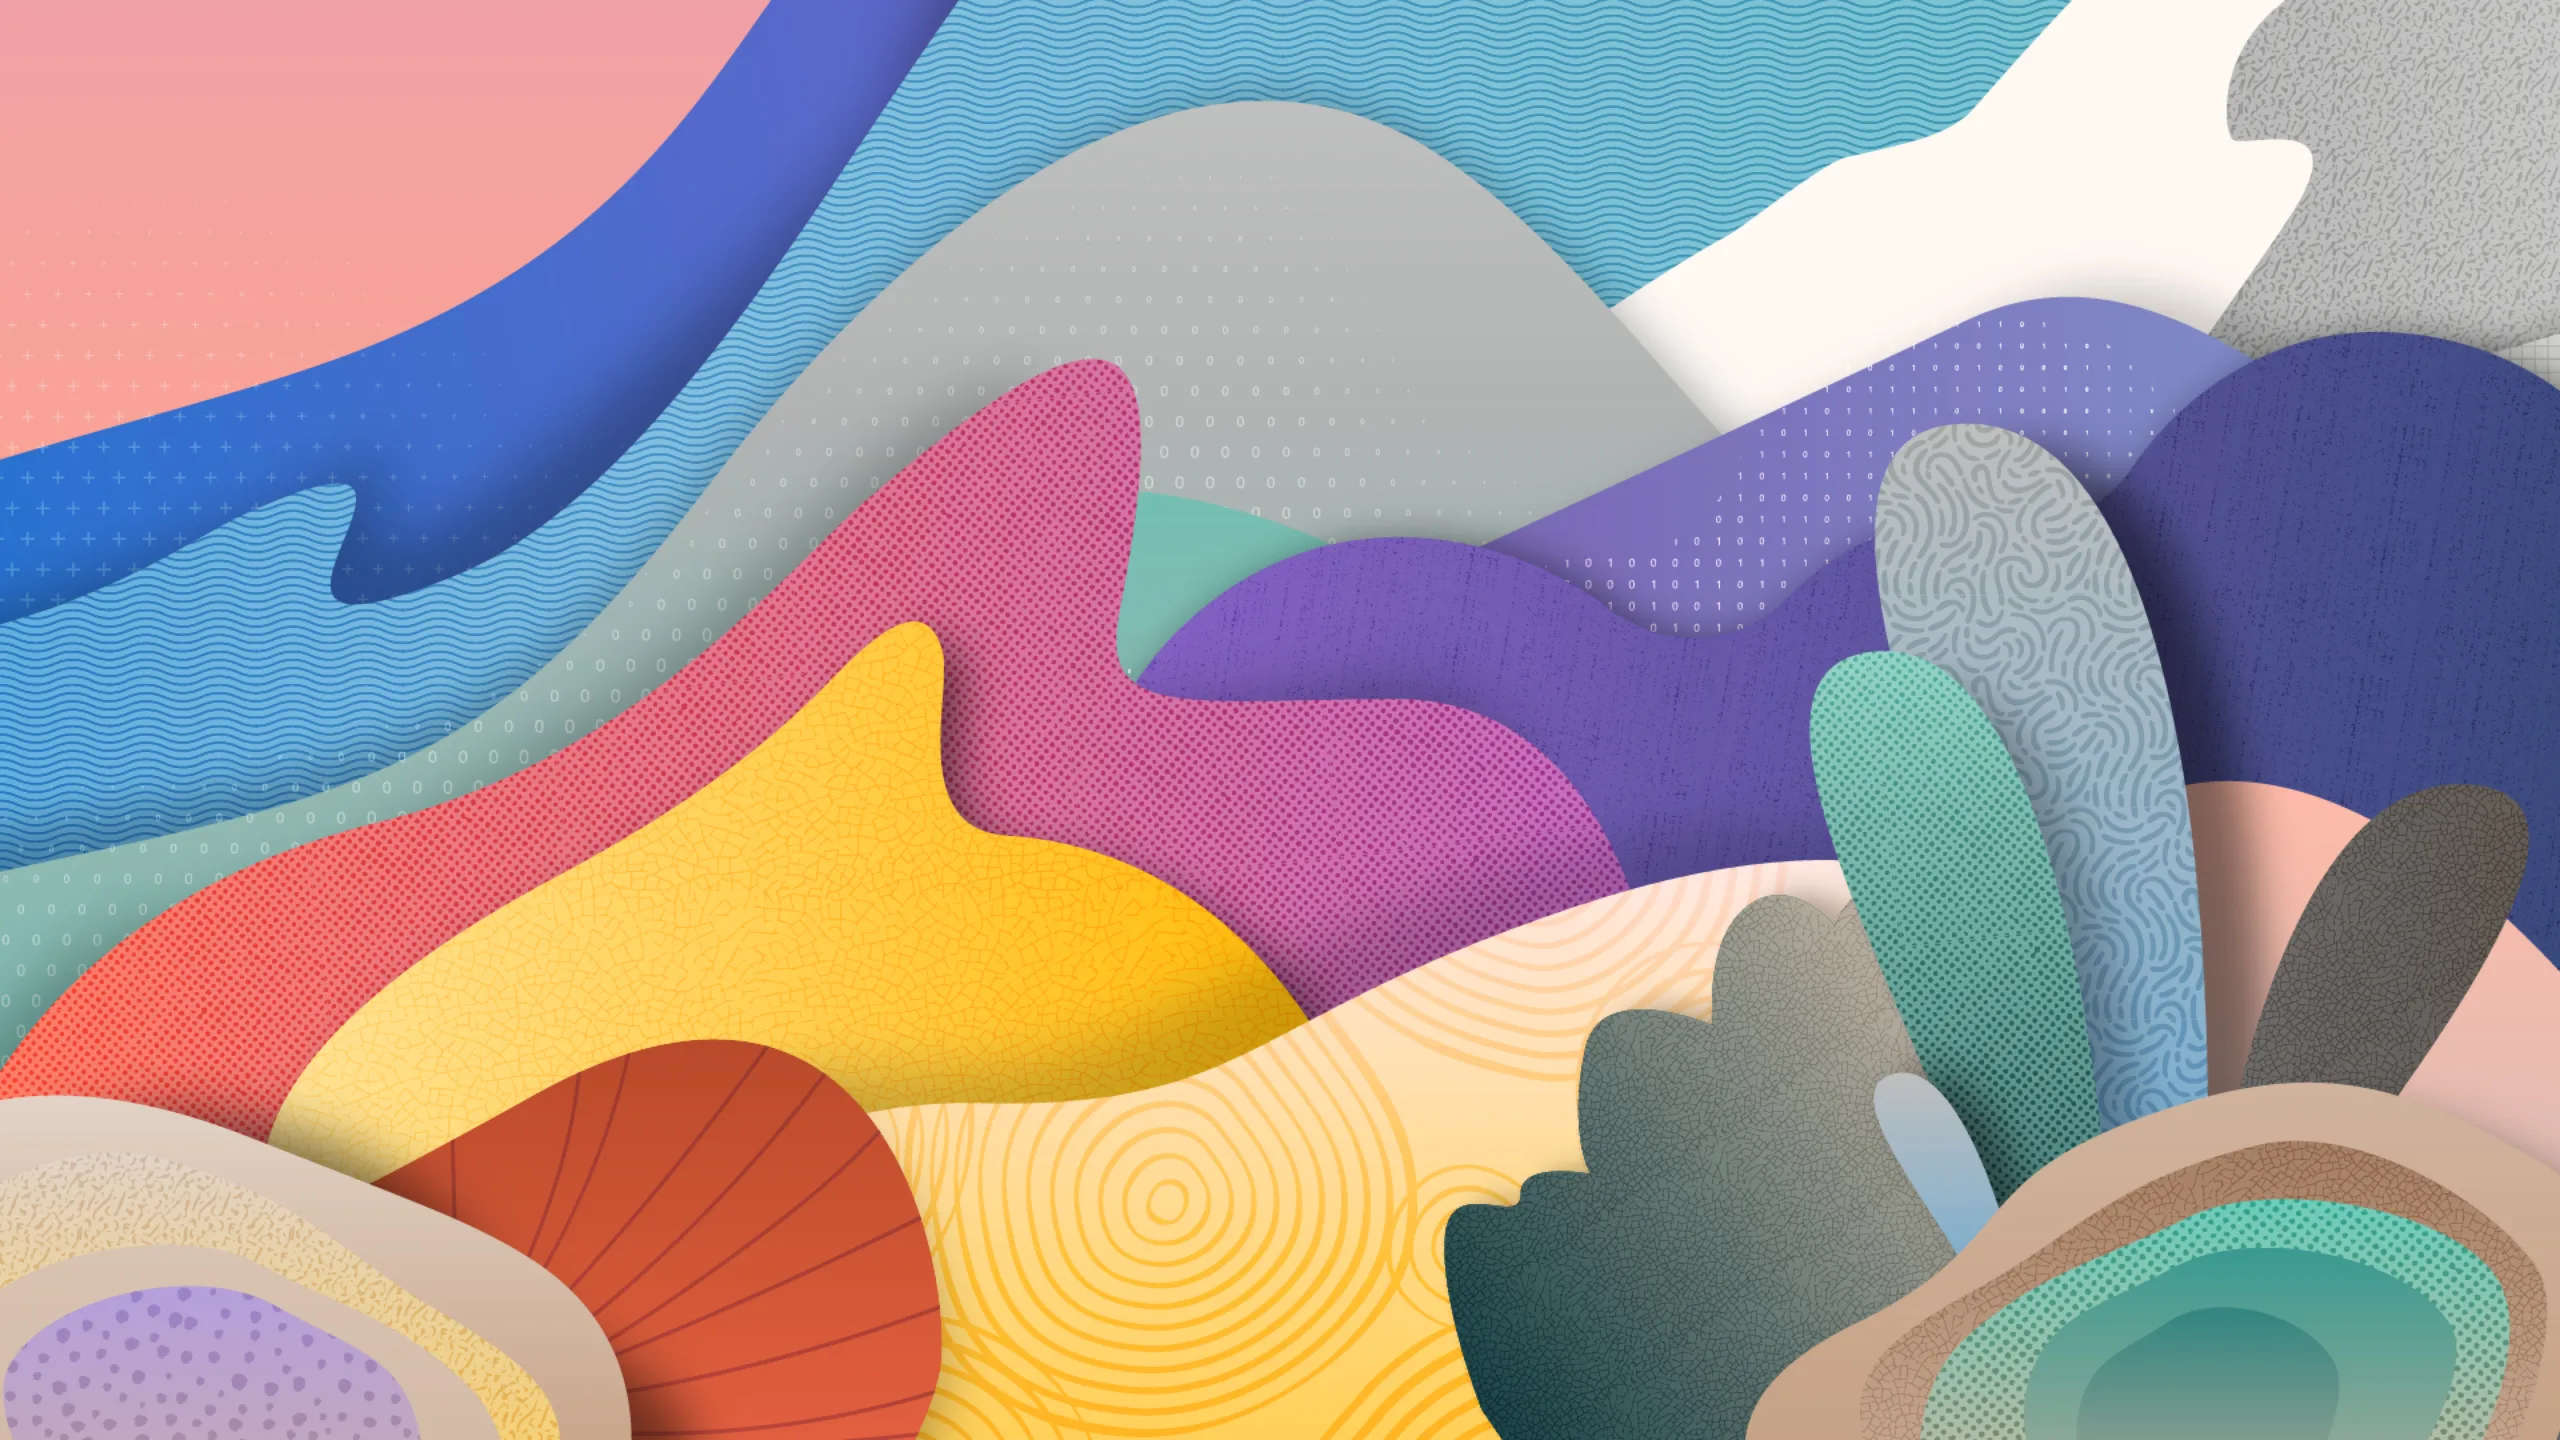 Abstract illustration of abstract shapes, featuring pink, blue, and purple colors in overlap.